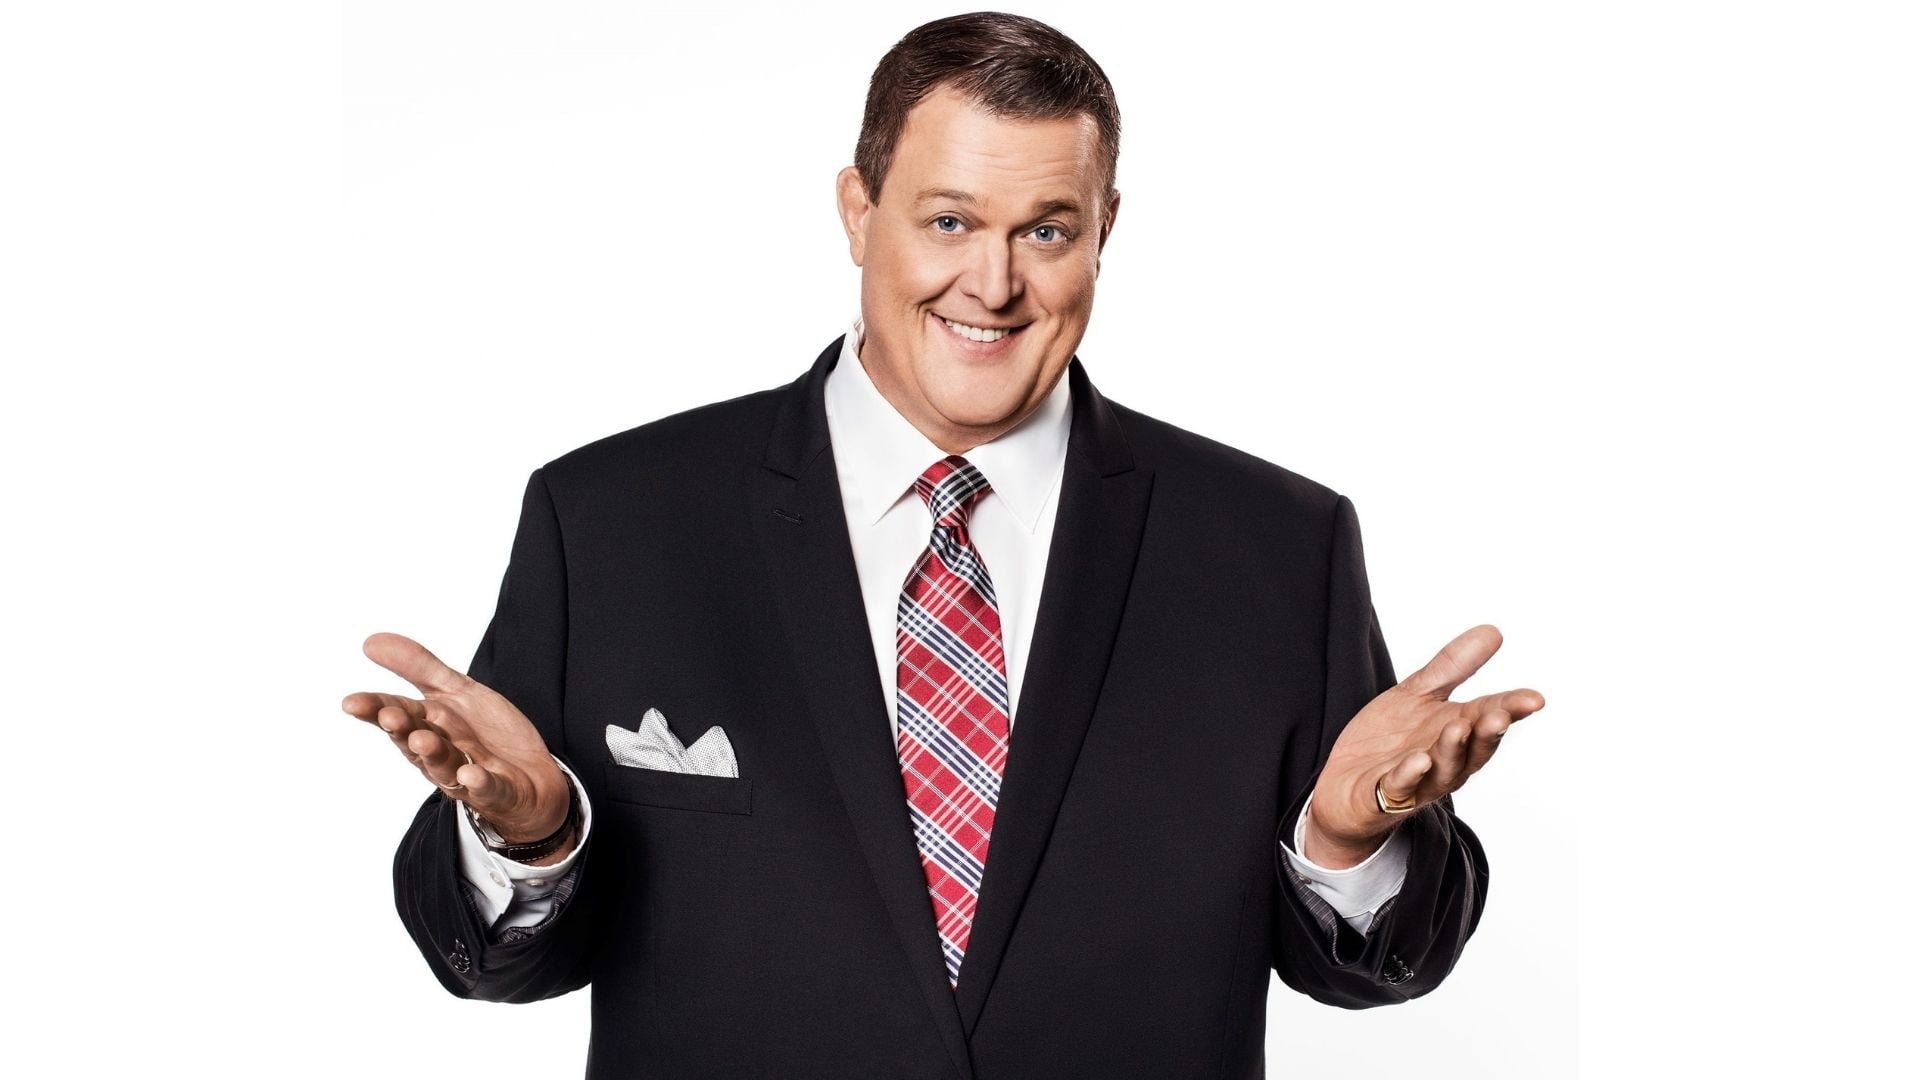 Billy Gardell's Weight Loss Experience